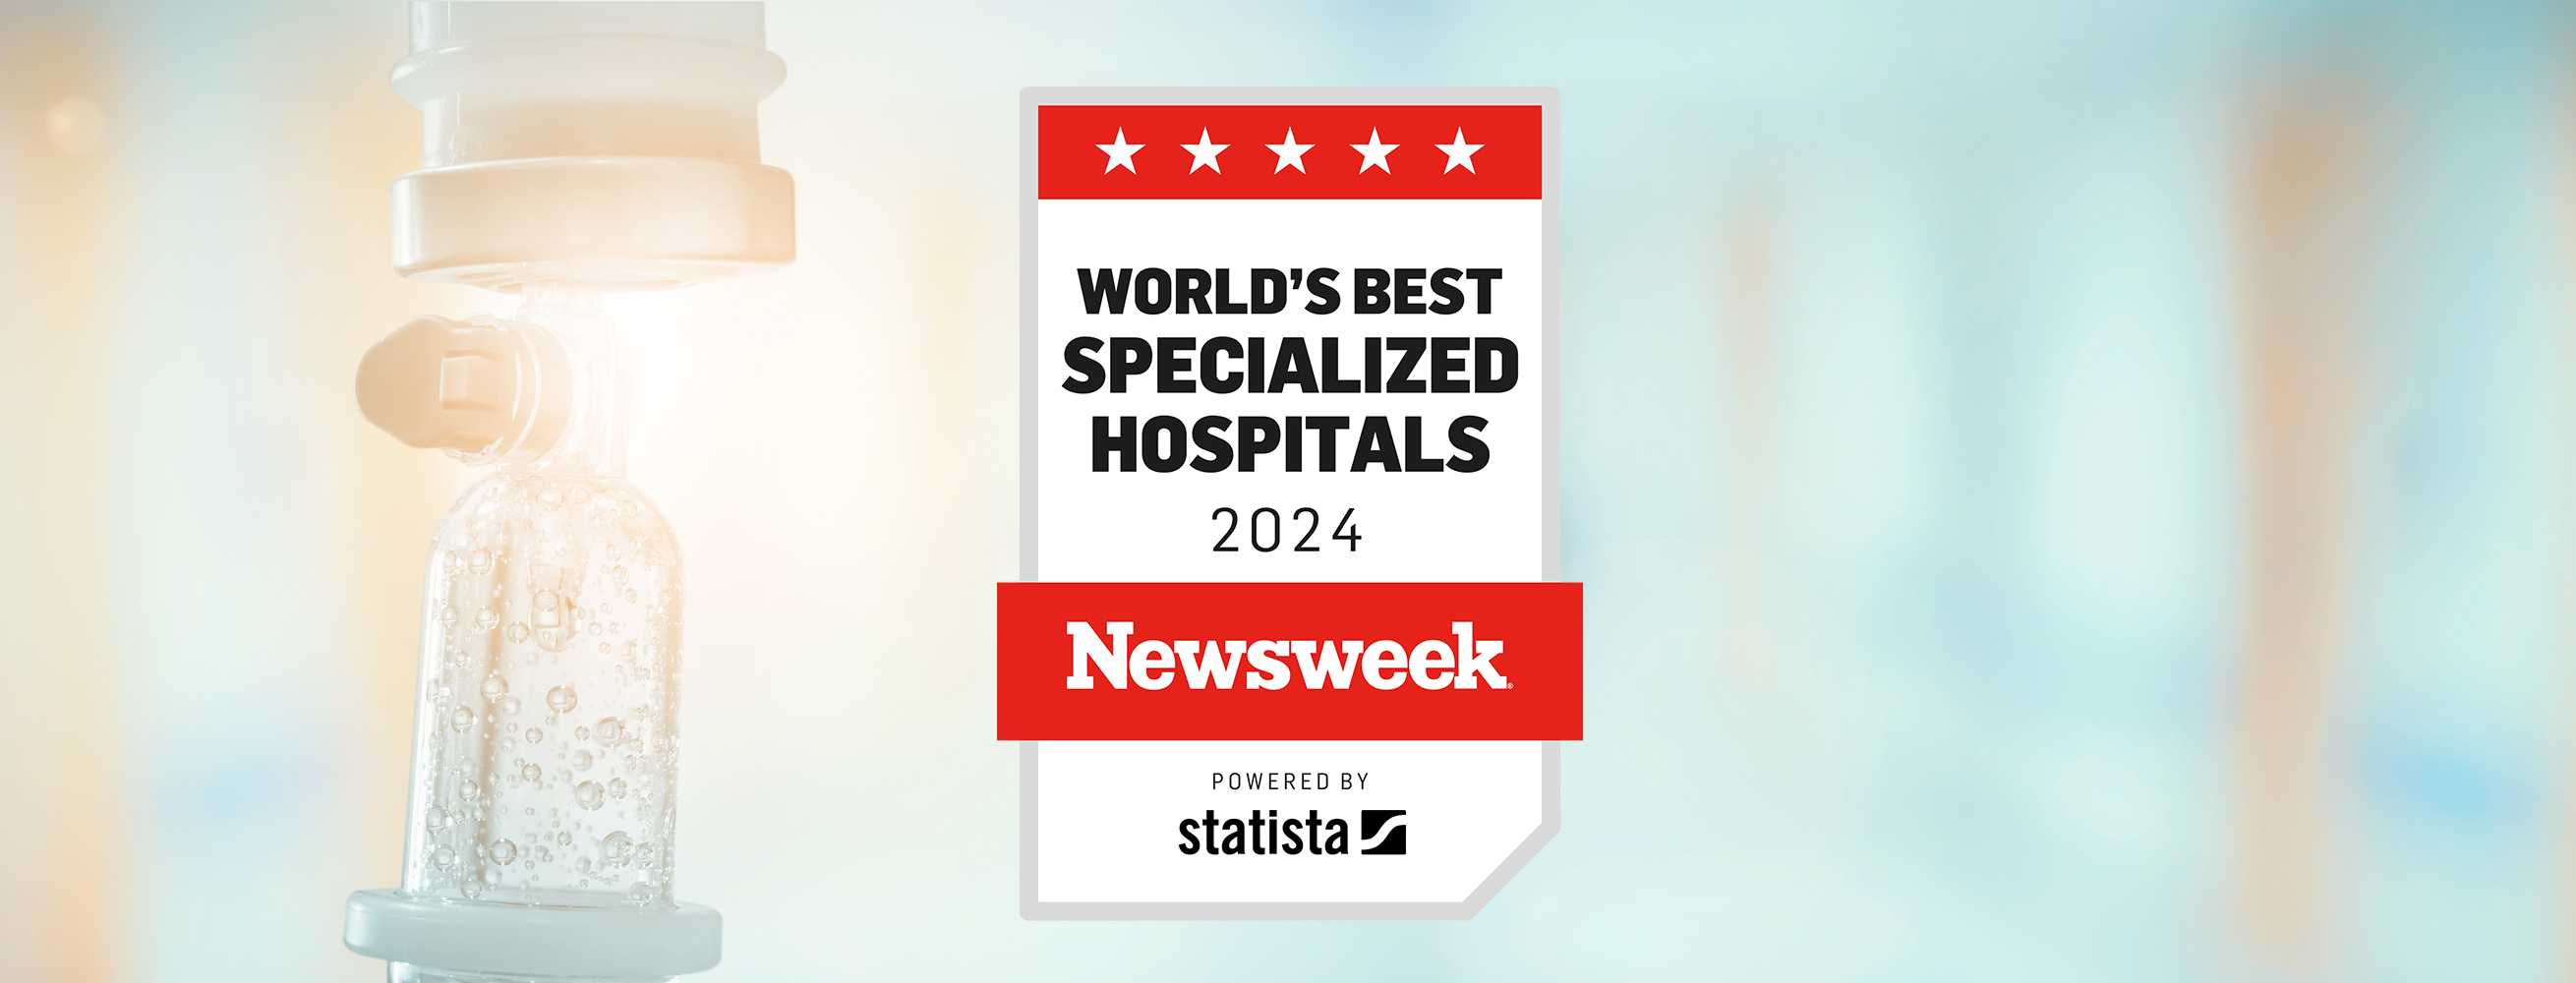 World's Best Specialized Hospitals 2024 Survey